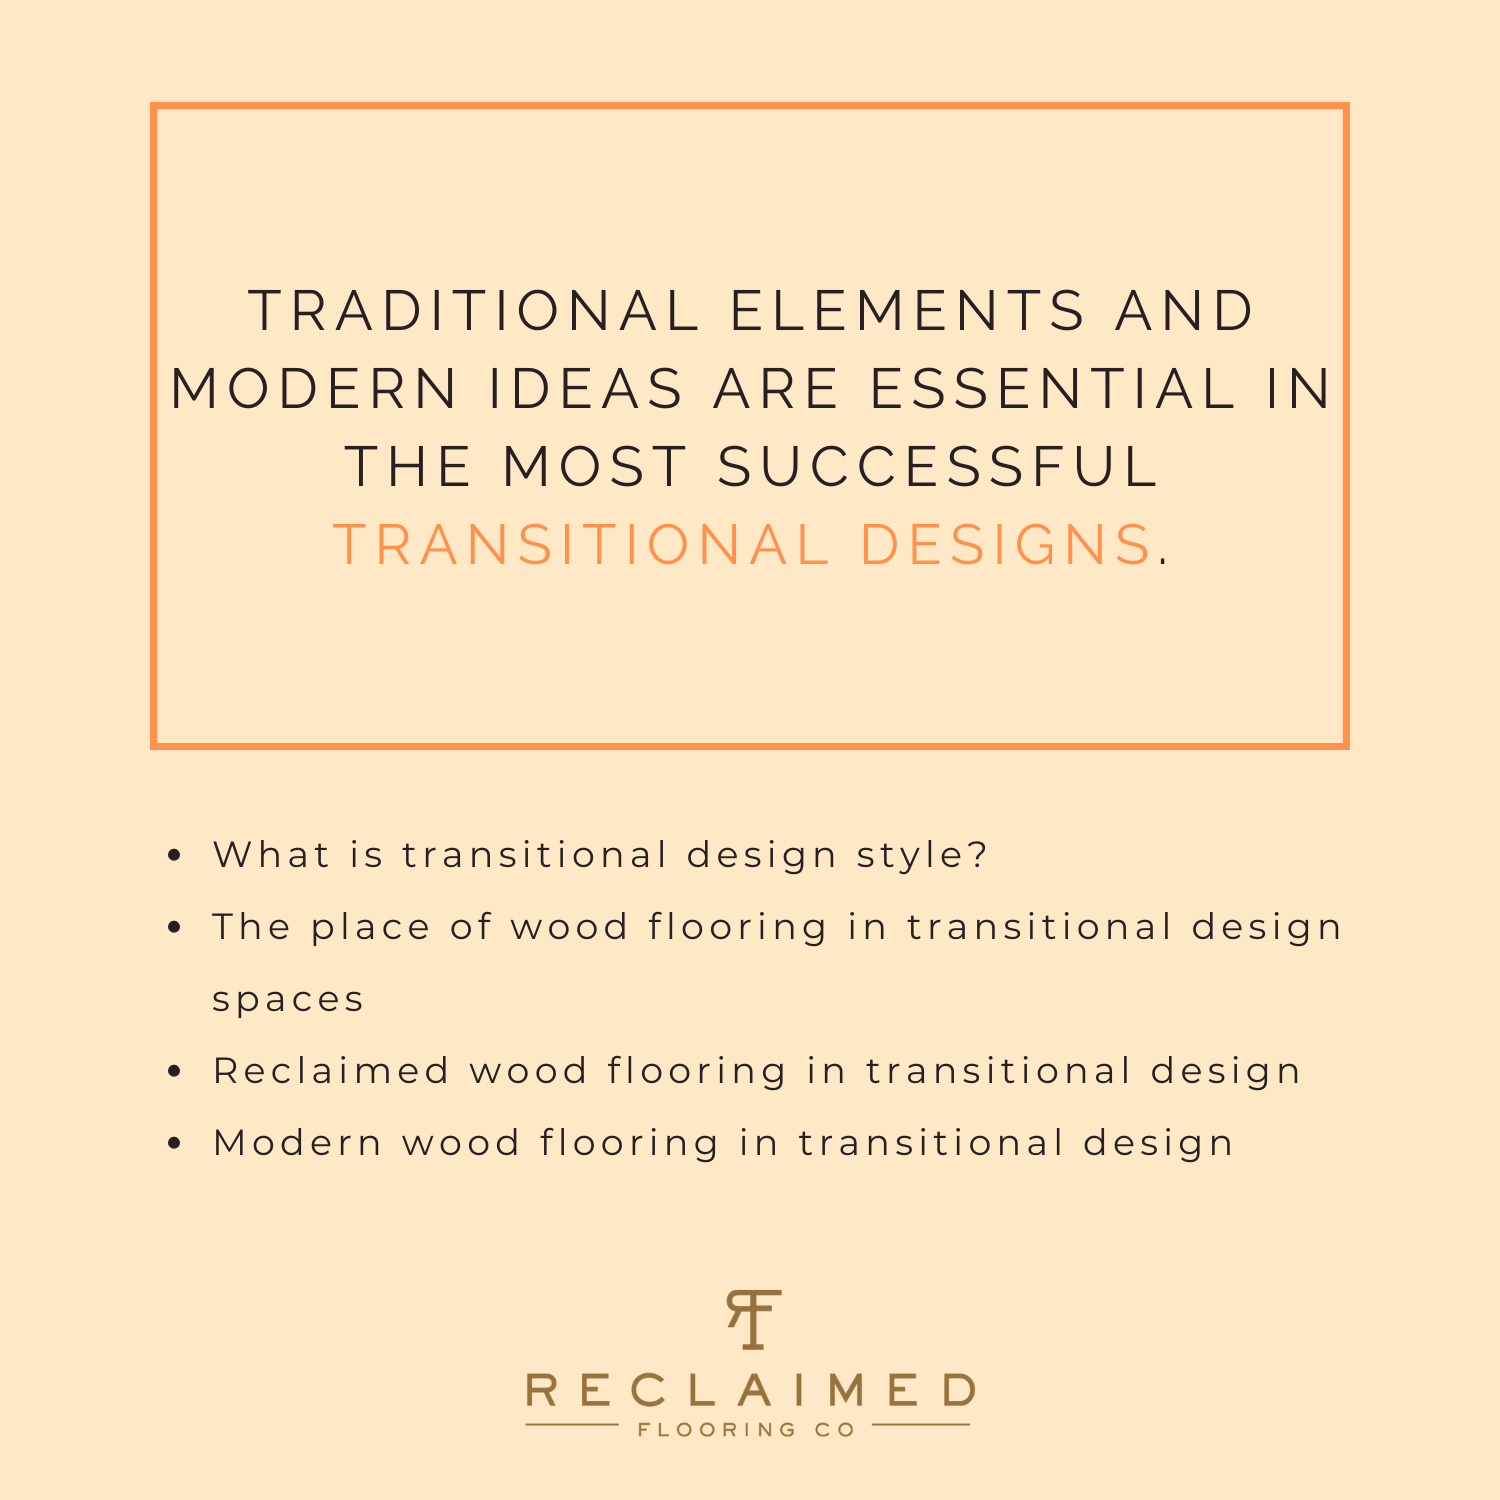 Traditional elements and modern ideas are essential in the most successful transitional designs.